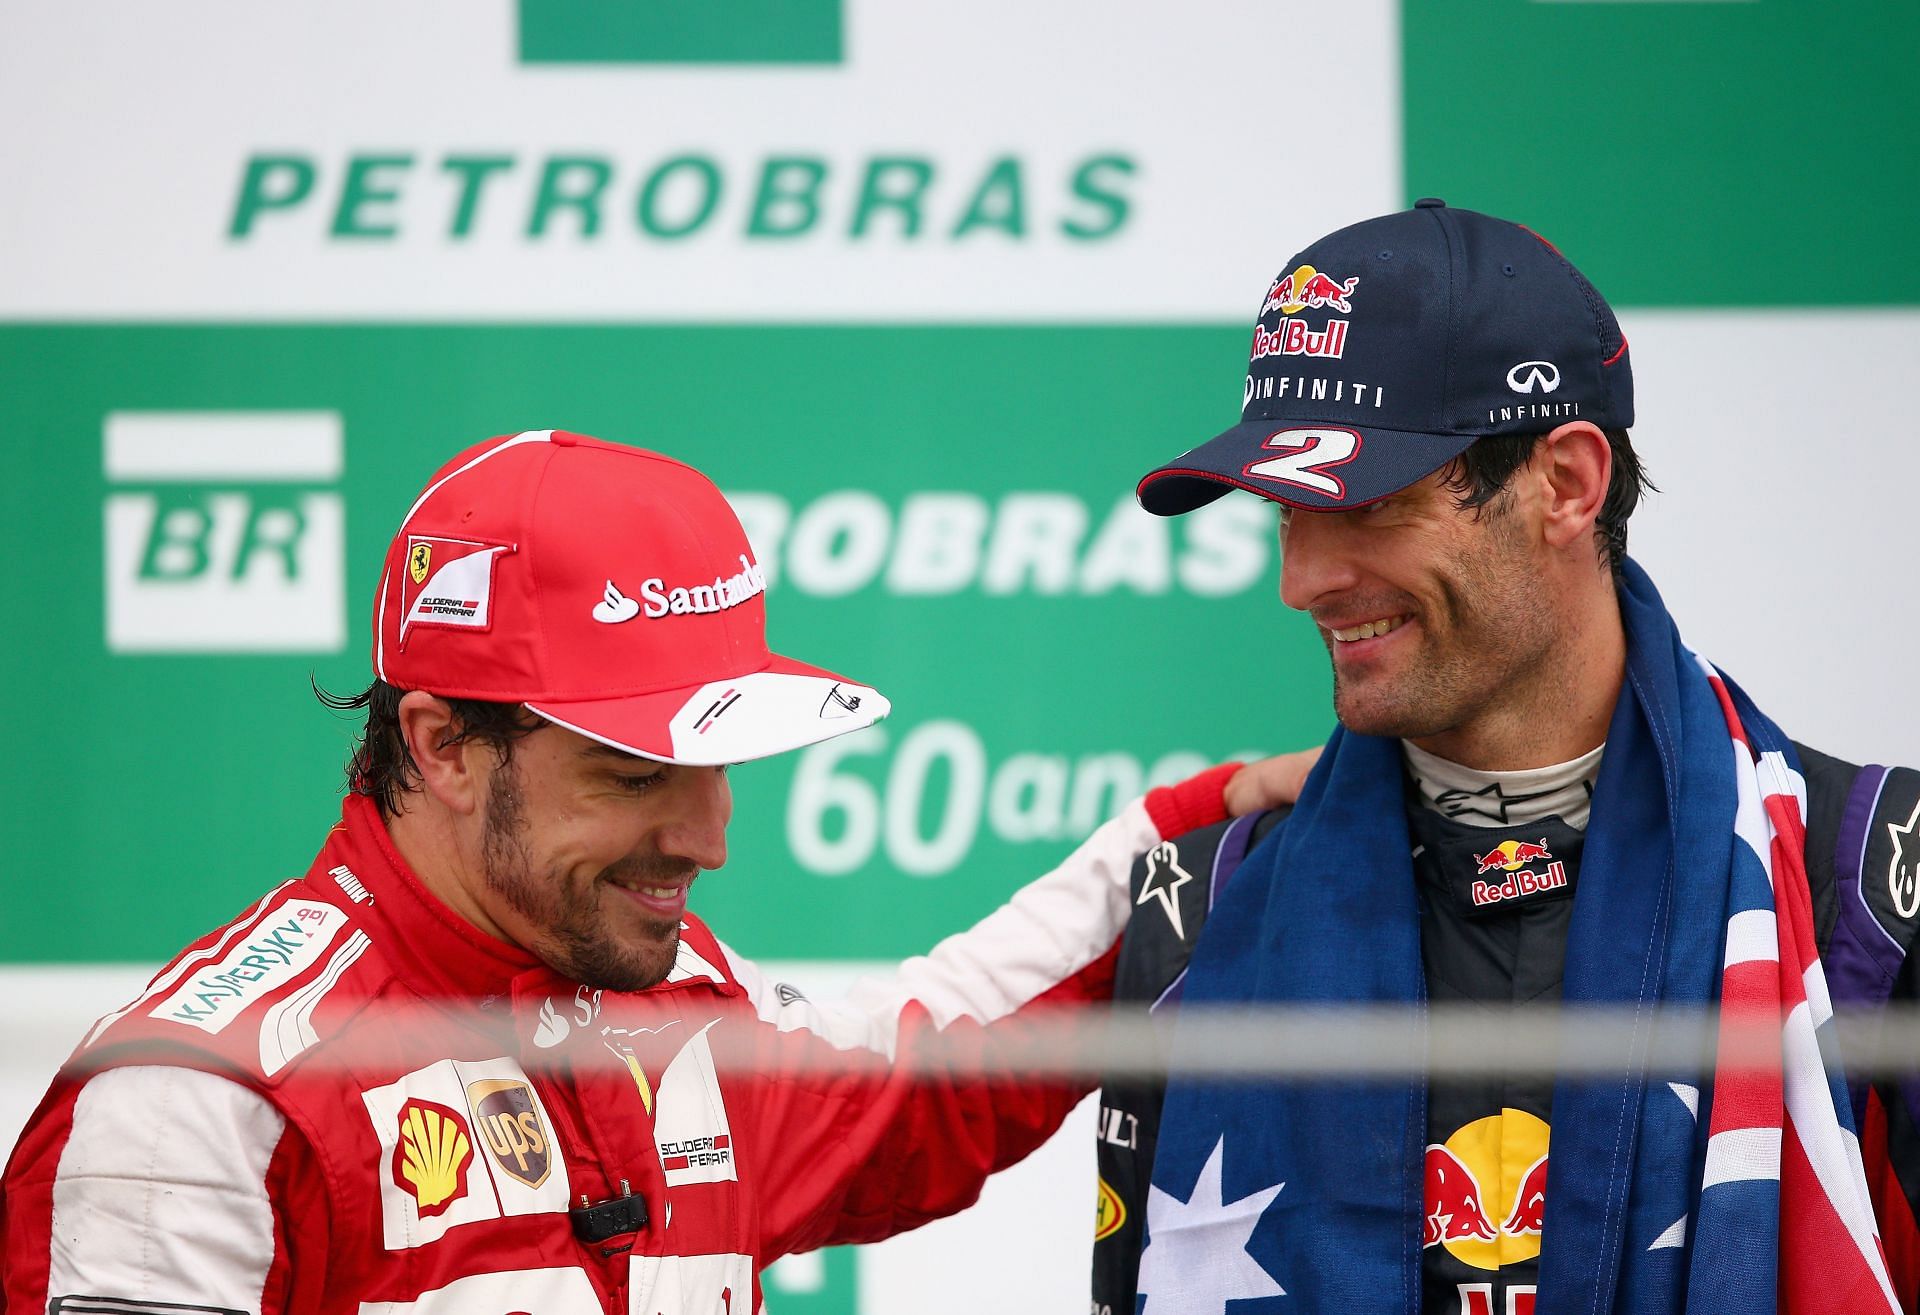 Mark Webber of Infiniti Red Bull Racing and Fernando Alonso of Ferrari celebrate on the podium at the 2013 Brazilian GP. (Photo by Clive Mason/Getty Images)